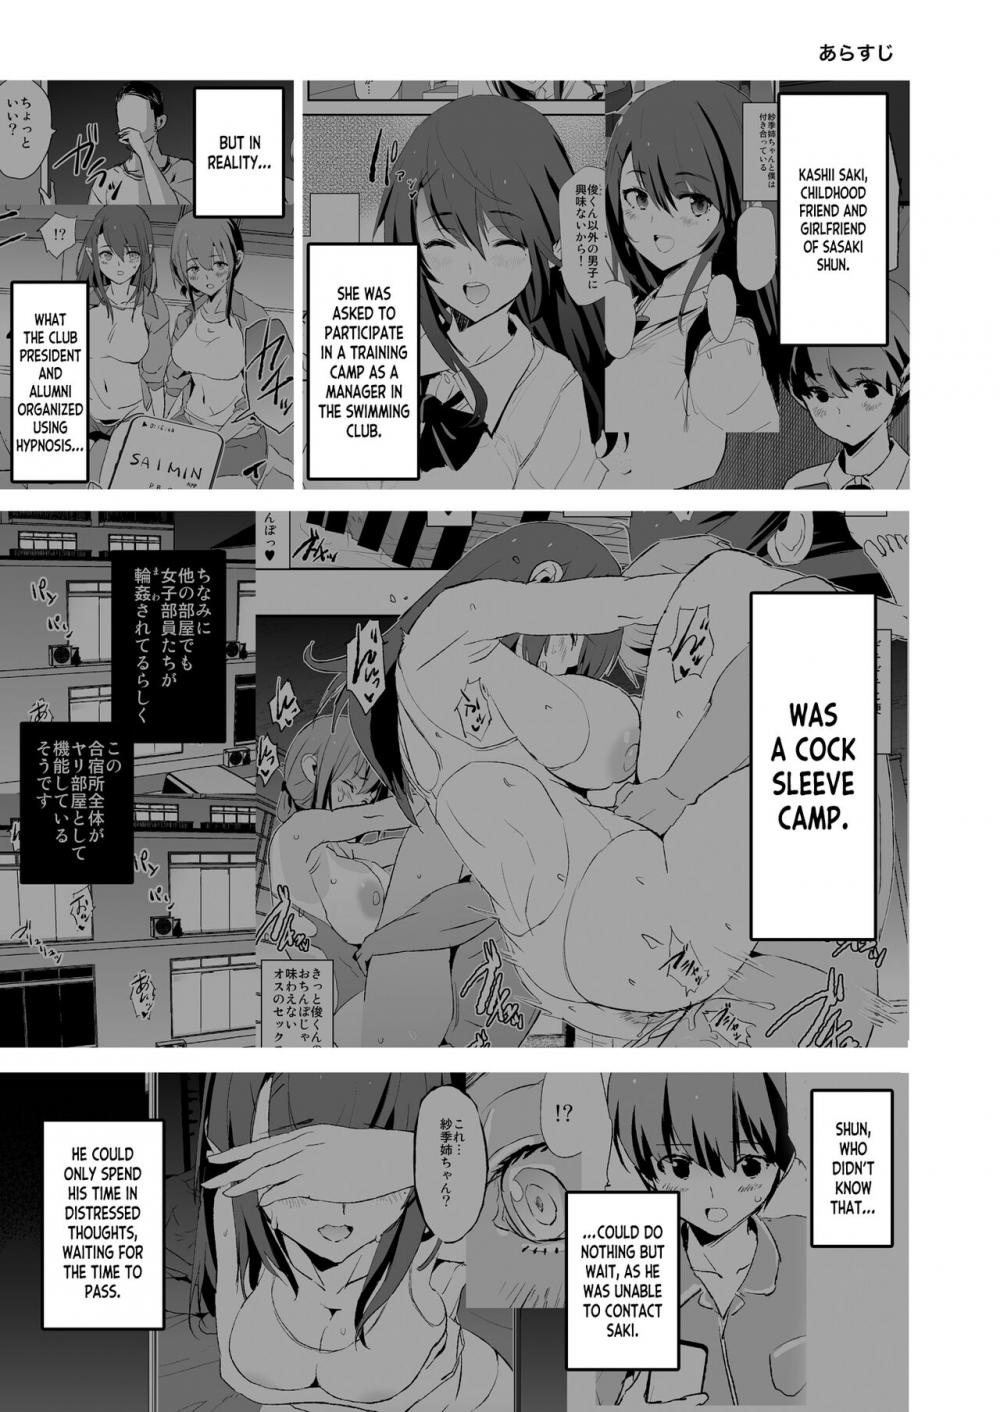 Hentai Manga Comic-After The Daughter Mother Cocksleeve - Cocksleeve Camp-Read-2